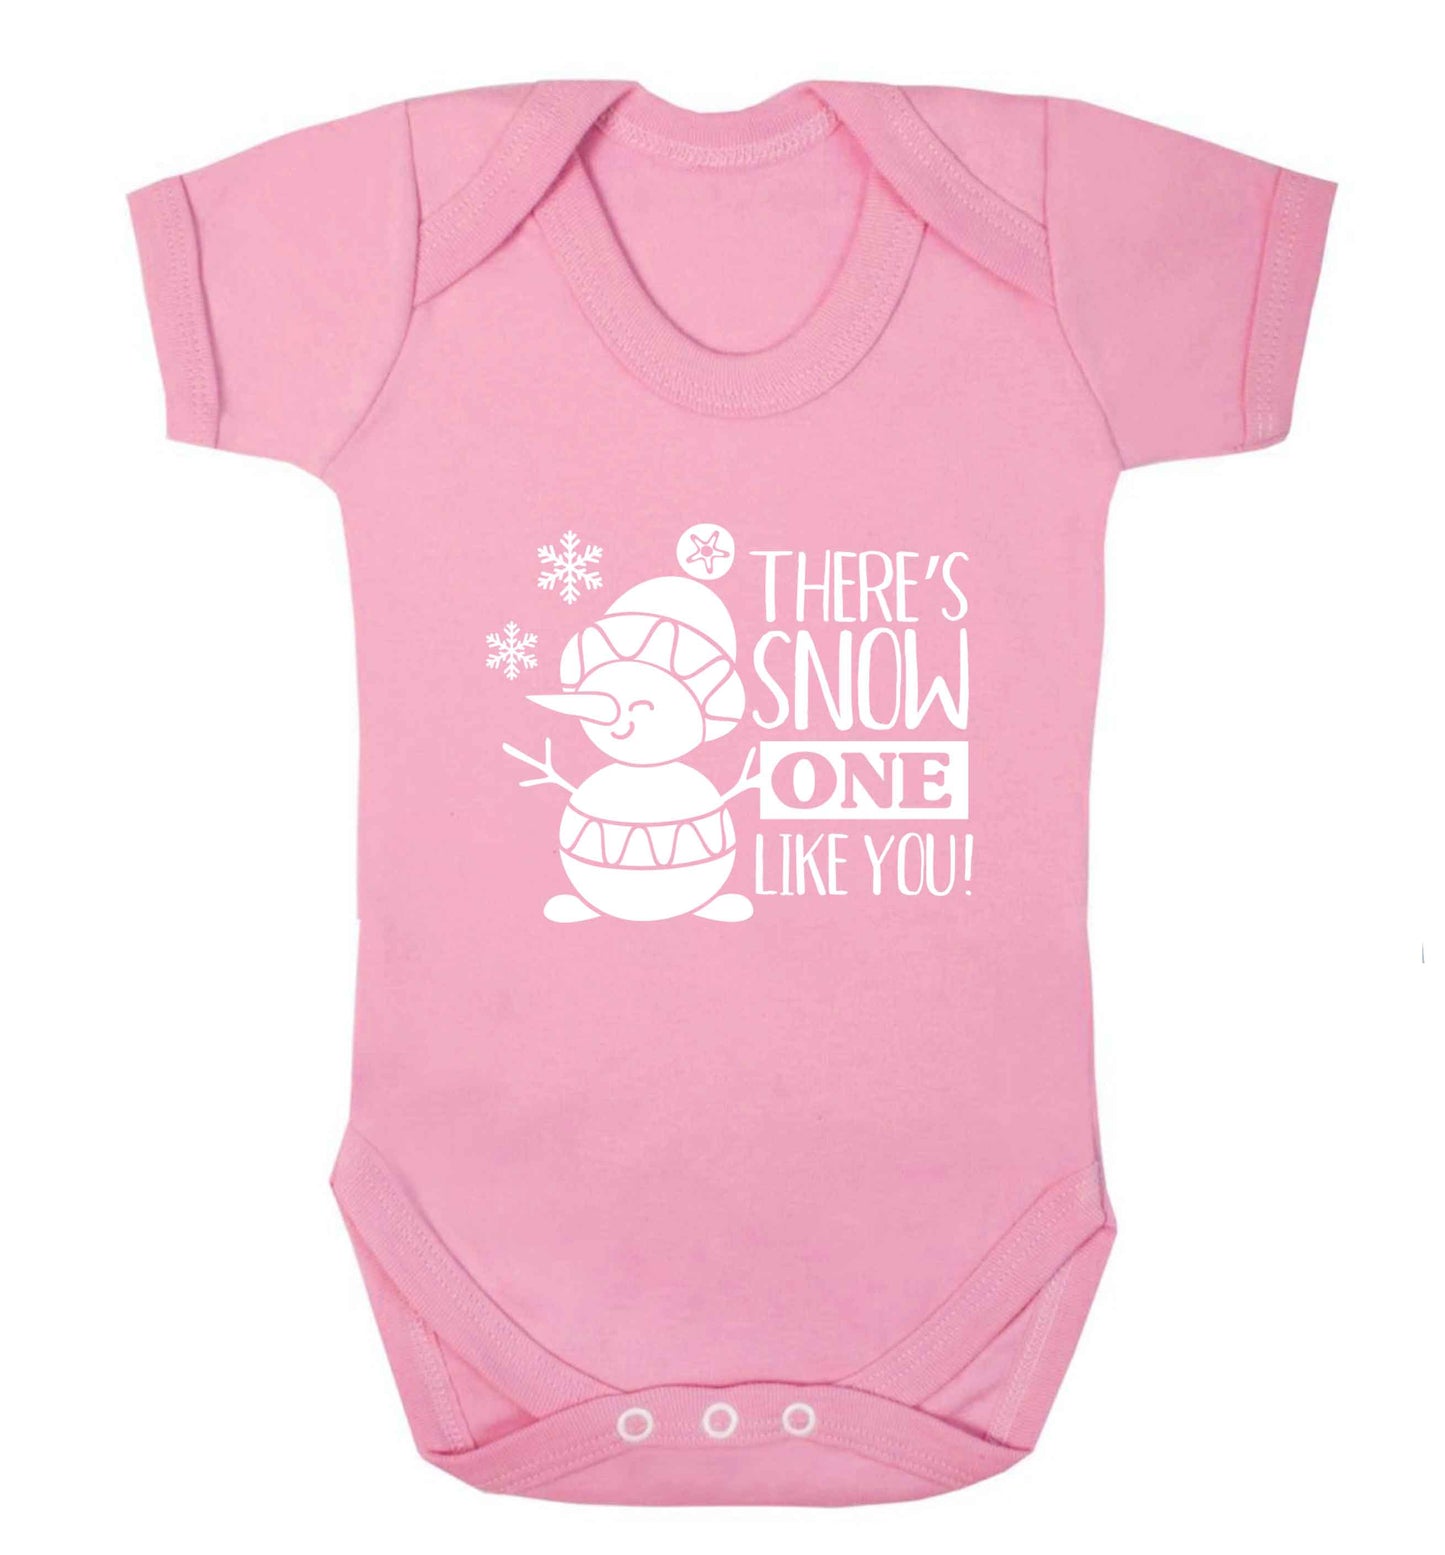 There's snow one like you baby vest pale pink 18-24 months